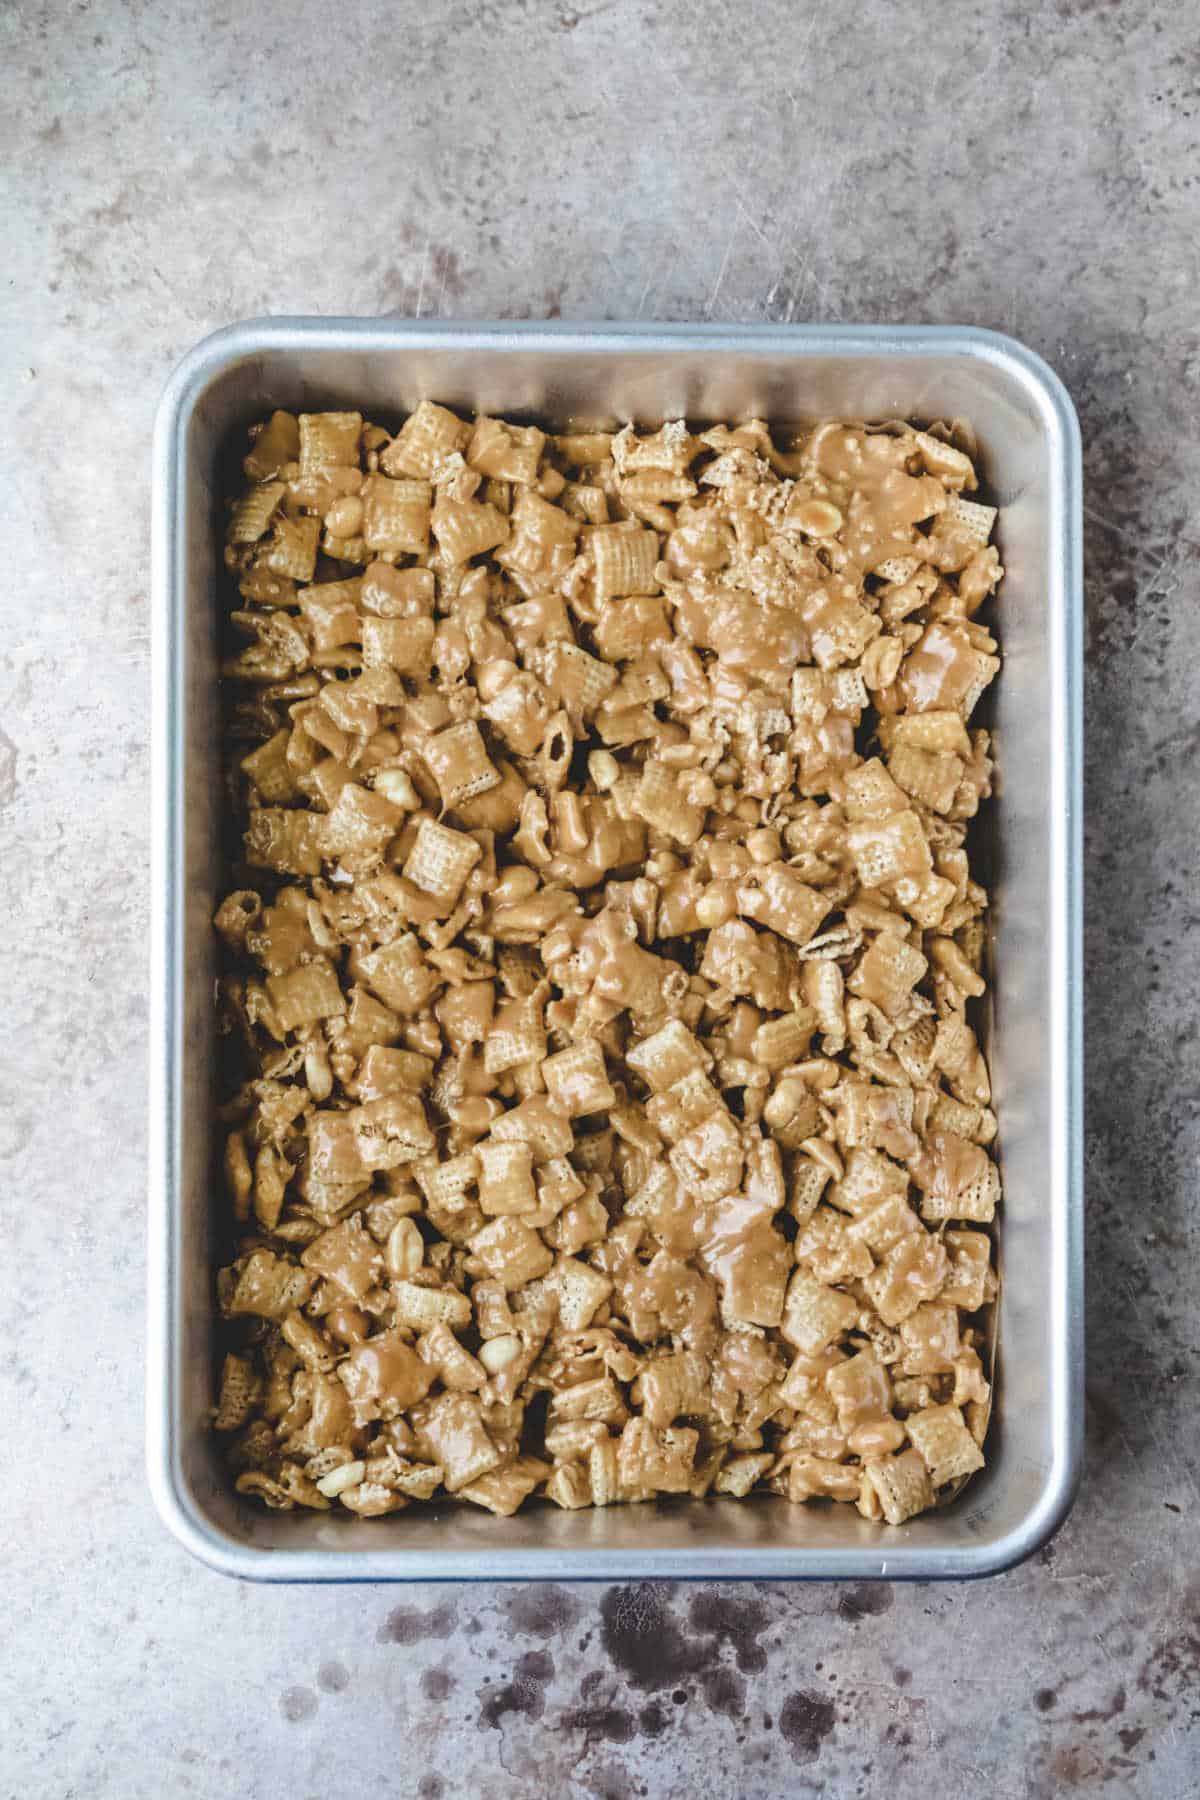 Peanut butter Chex cereal treats in a baking pan.